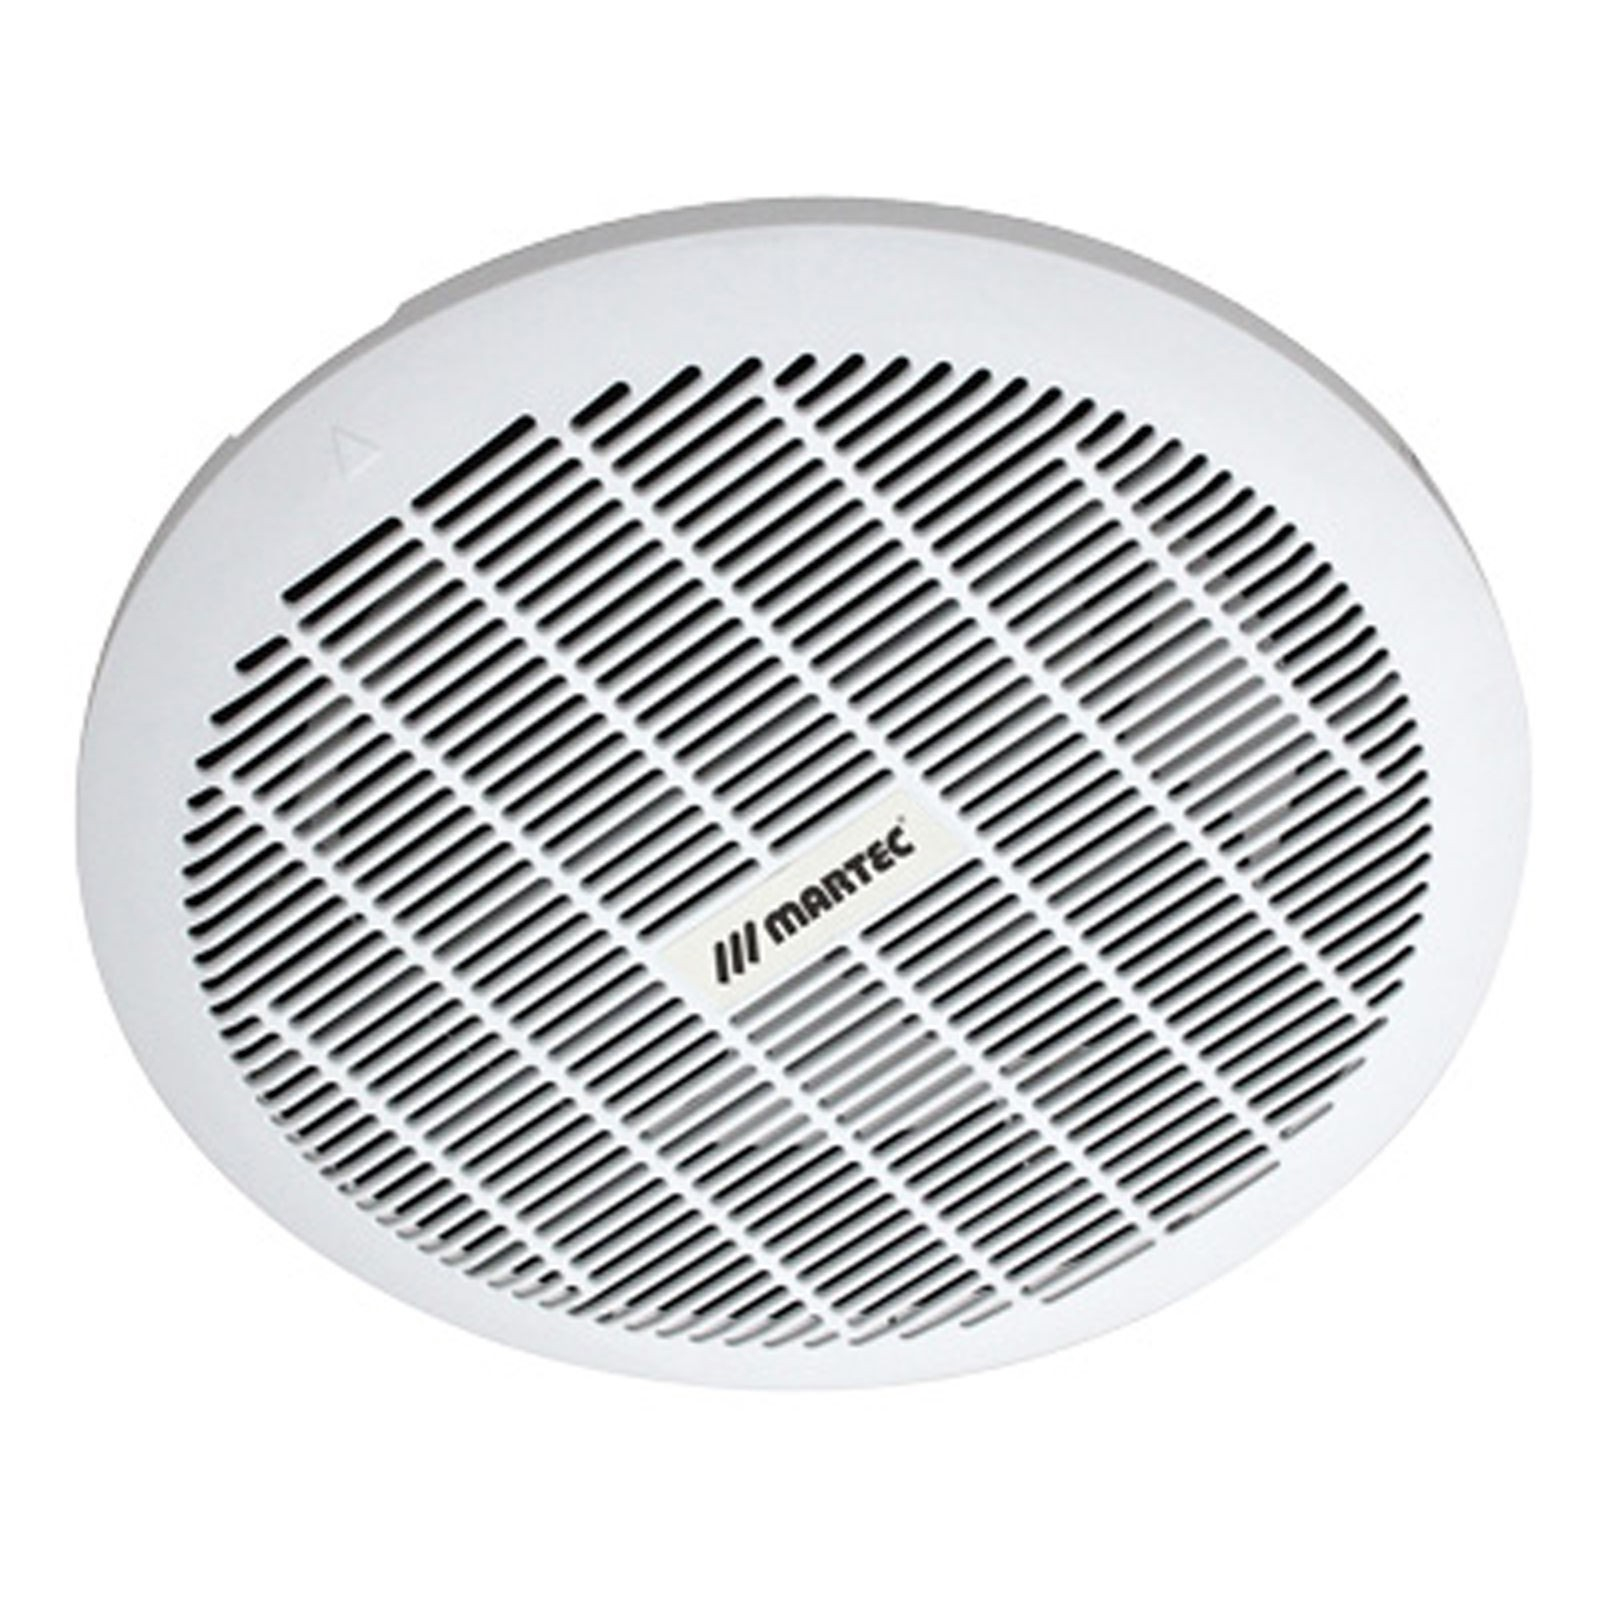 Martec Core Round Bathroom Exhaust Fan 200m with regard to proportions 1600 X 1600